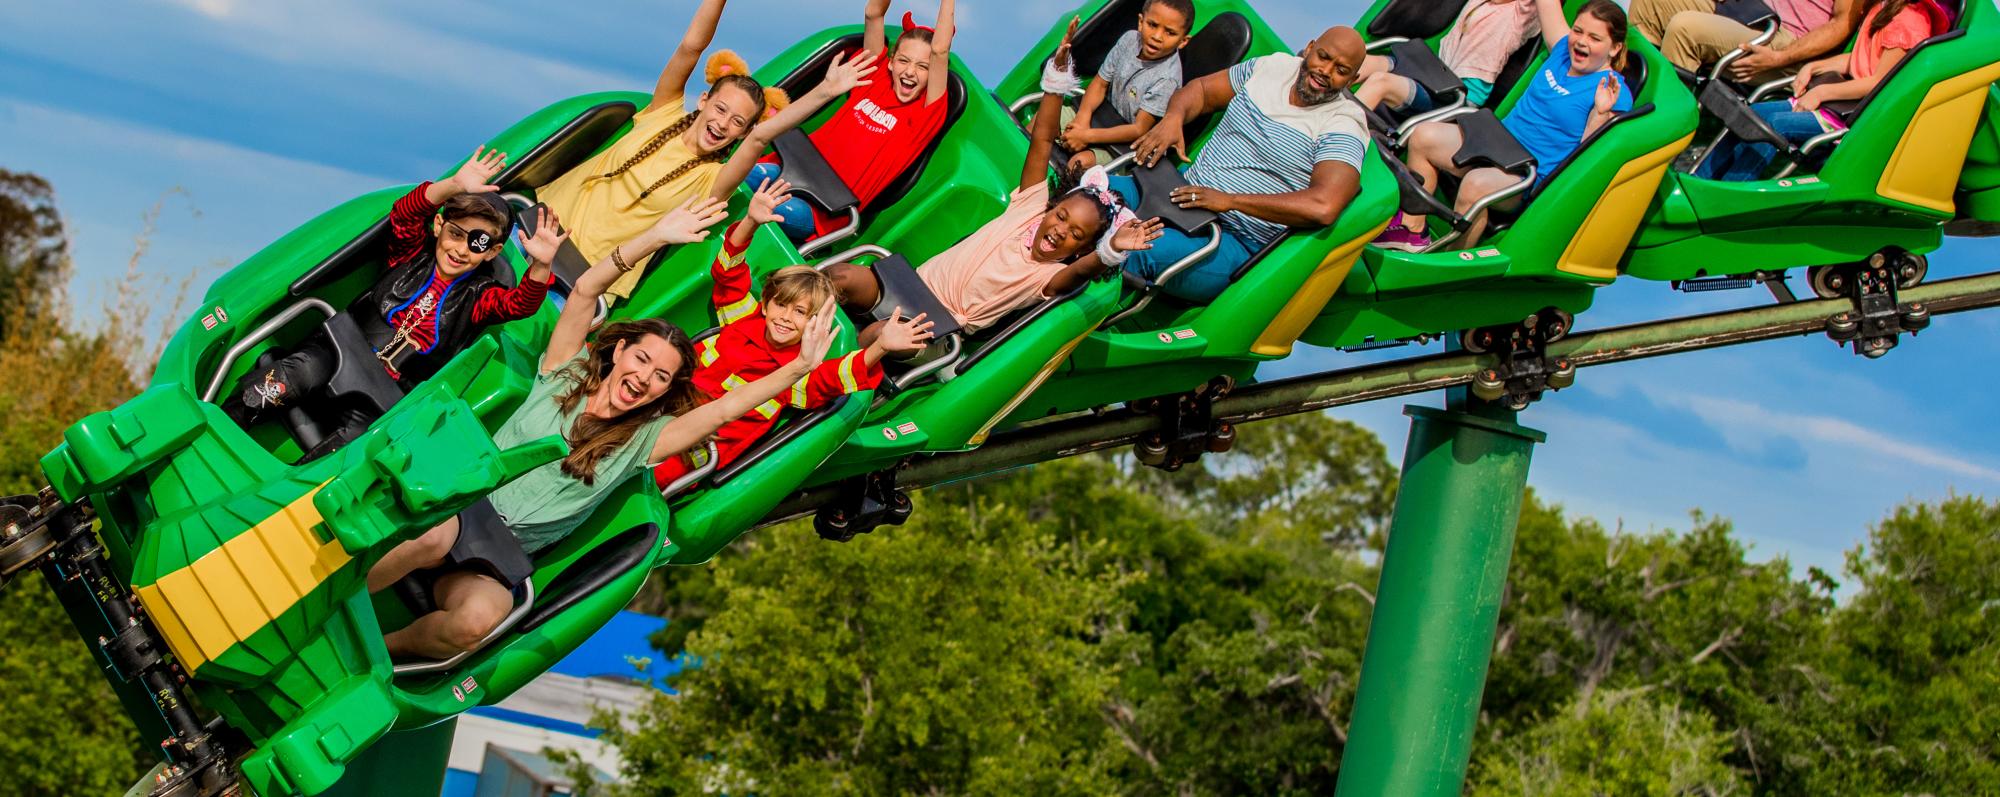 People riding a dragon rollercoaster at Legoland